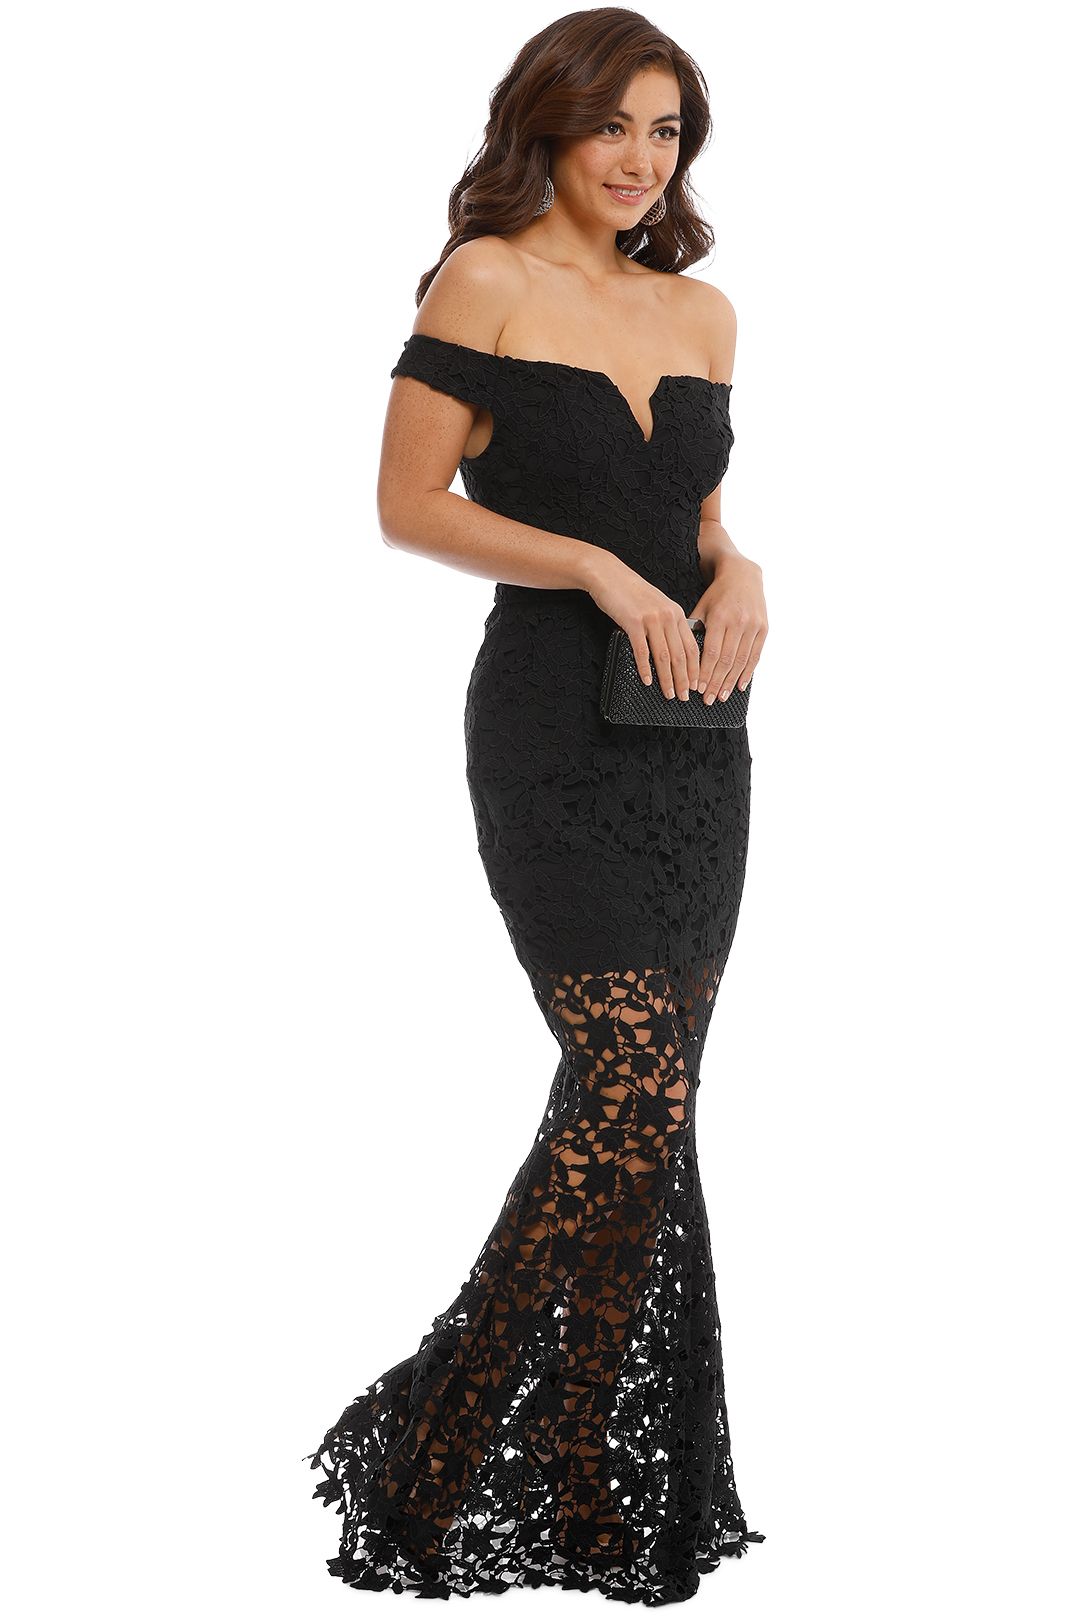 Grace and Hart - Heart Beat Gown - Black - Side